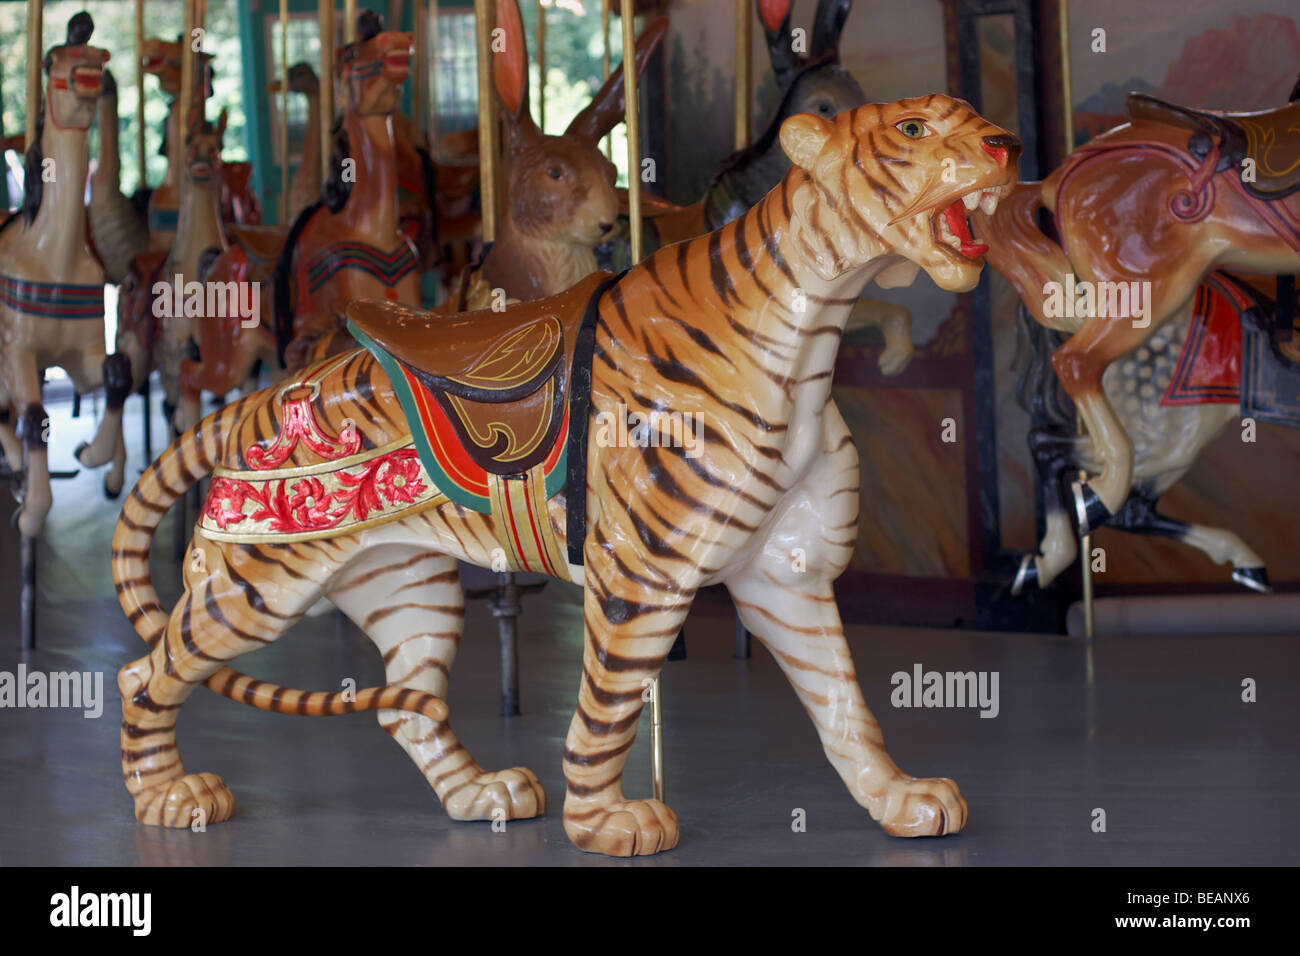 A menagerie tiger on the carousel at Glen Echo Park, Glen Echo, Maryland. Stock Photo